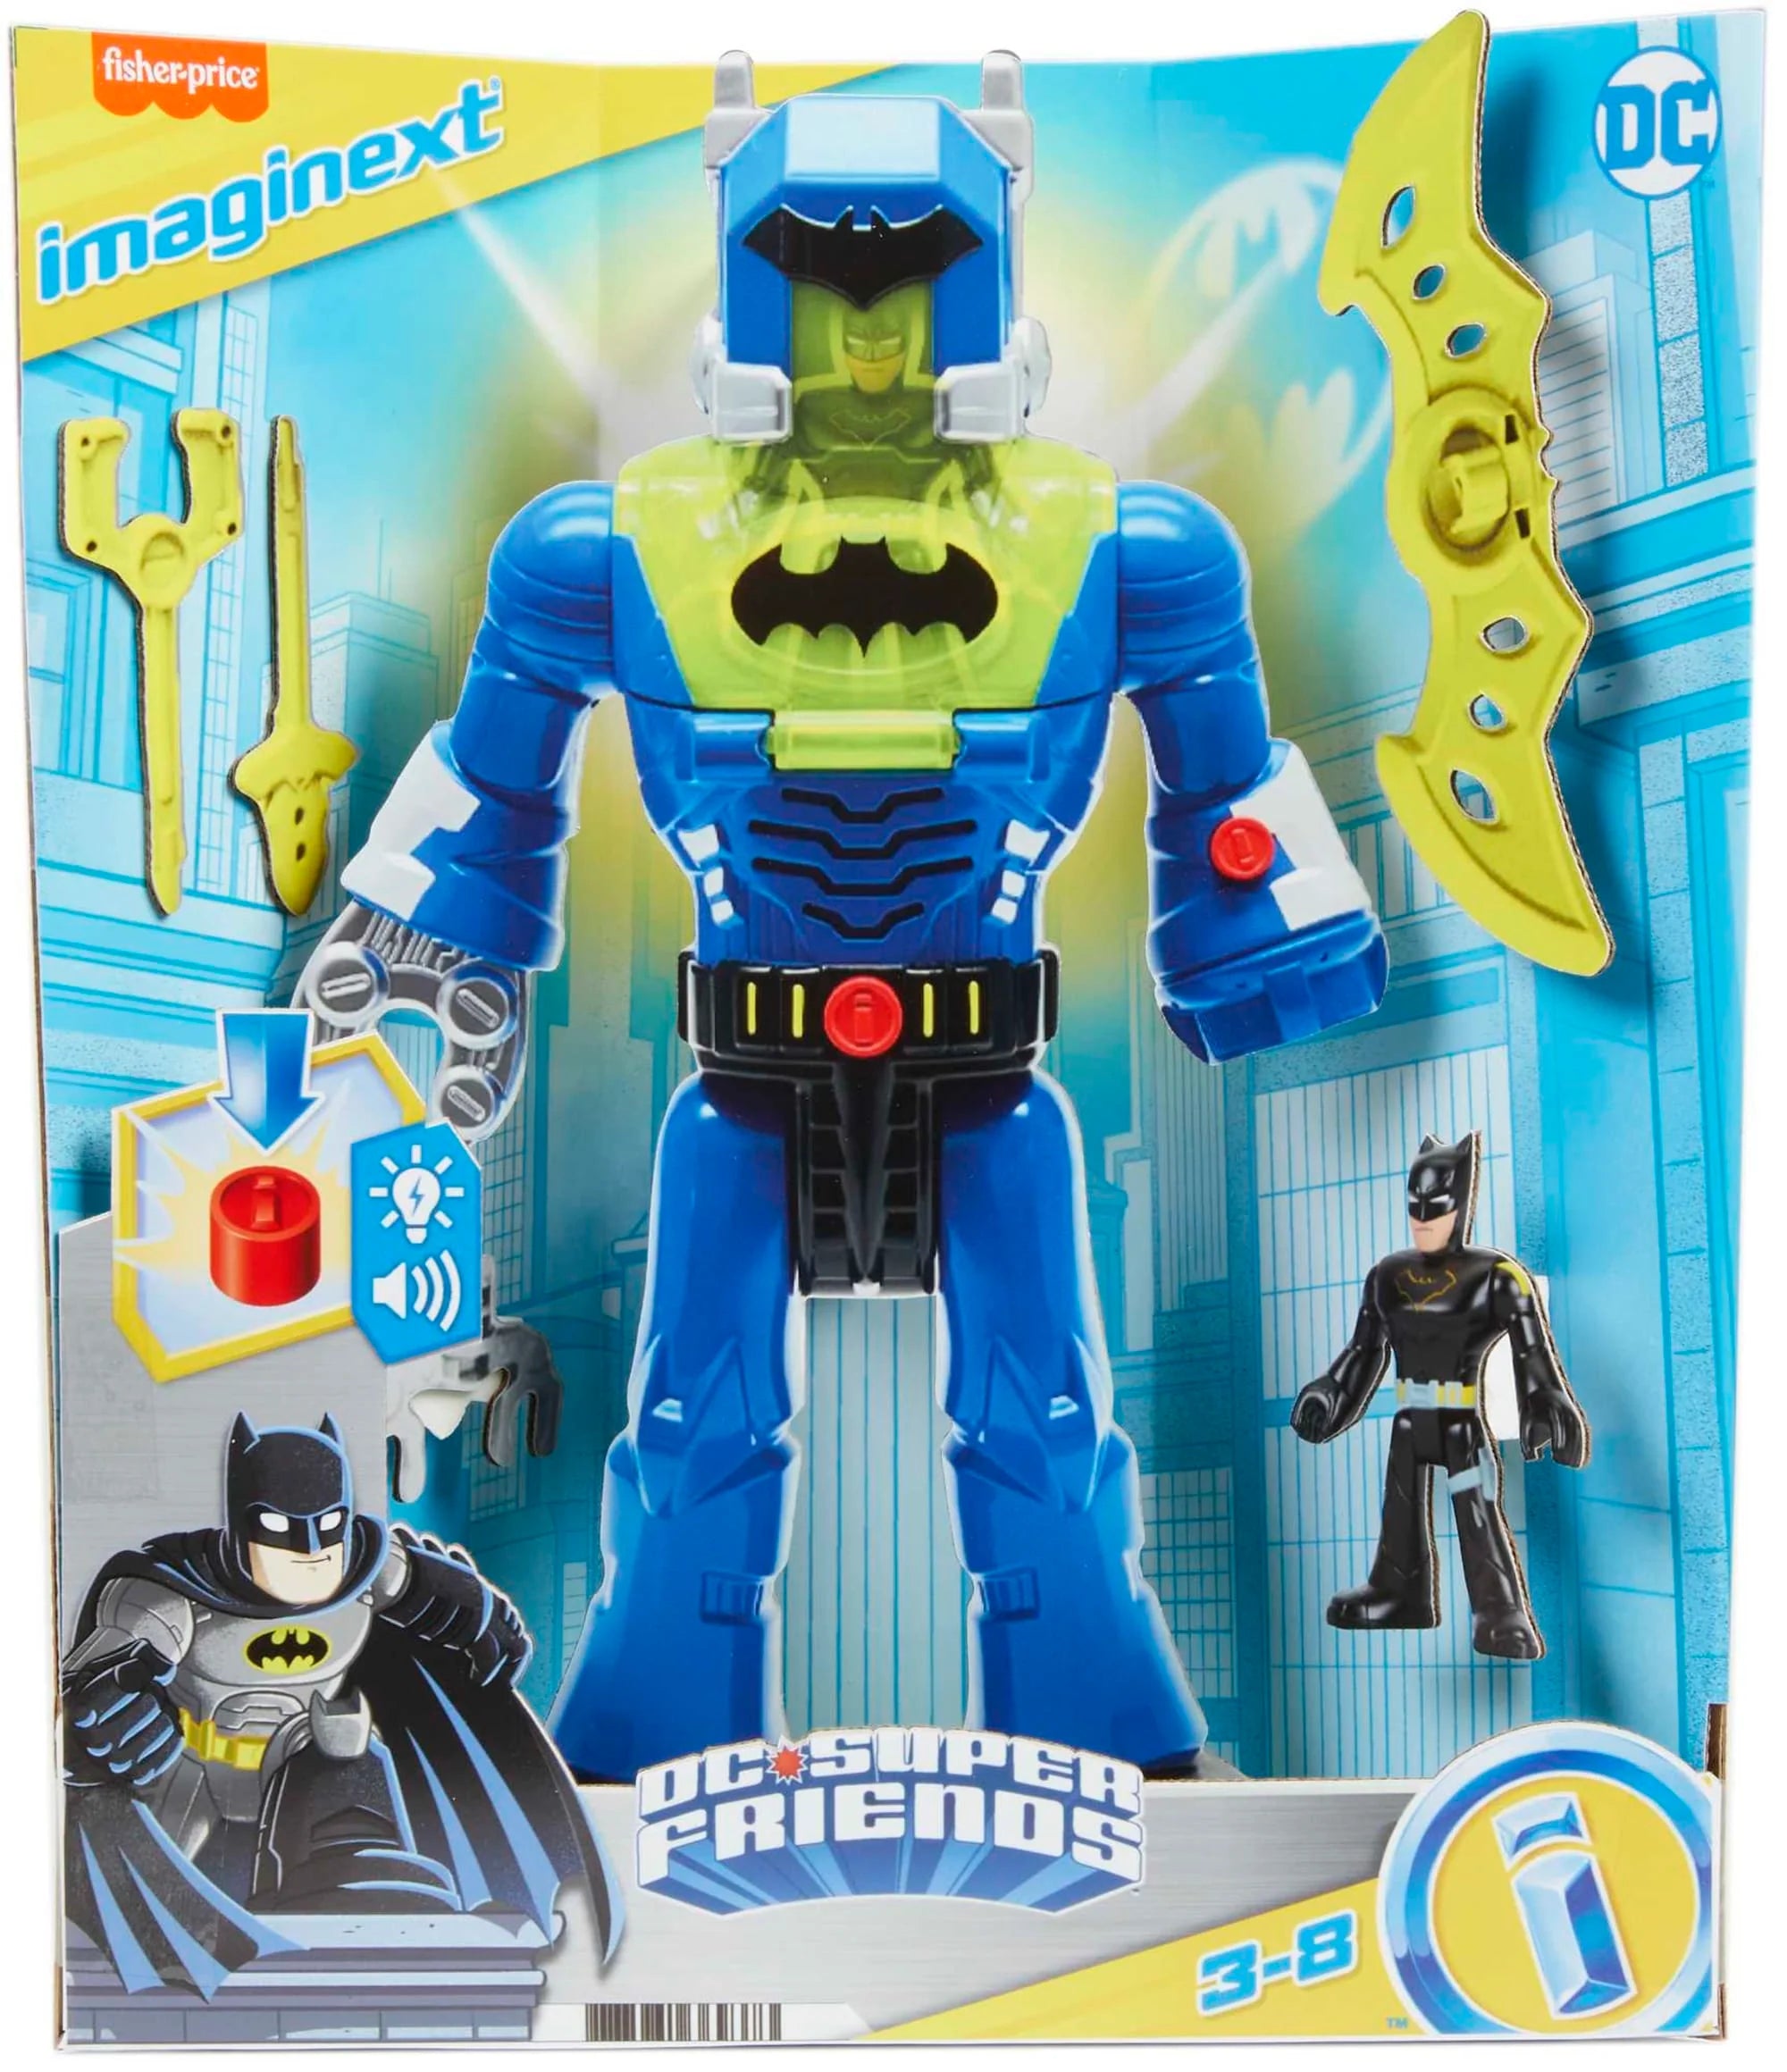 Fisher Price-Fisher-Price Imaginext - DC Super Friends Batman Insider & Exo Suit-HGX98-Legacy Toys